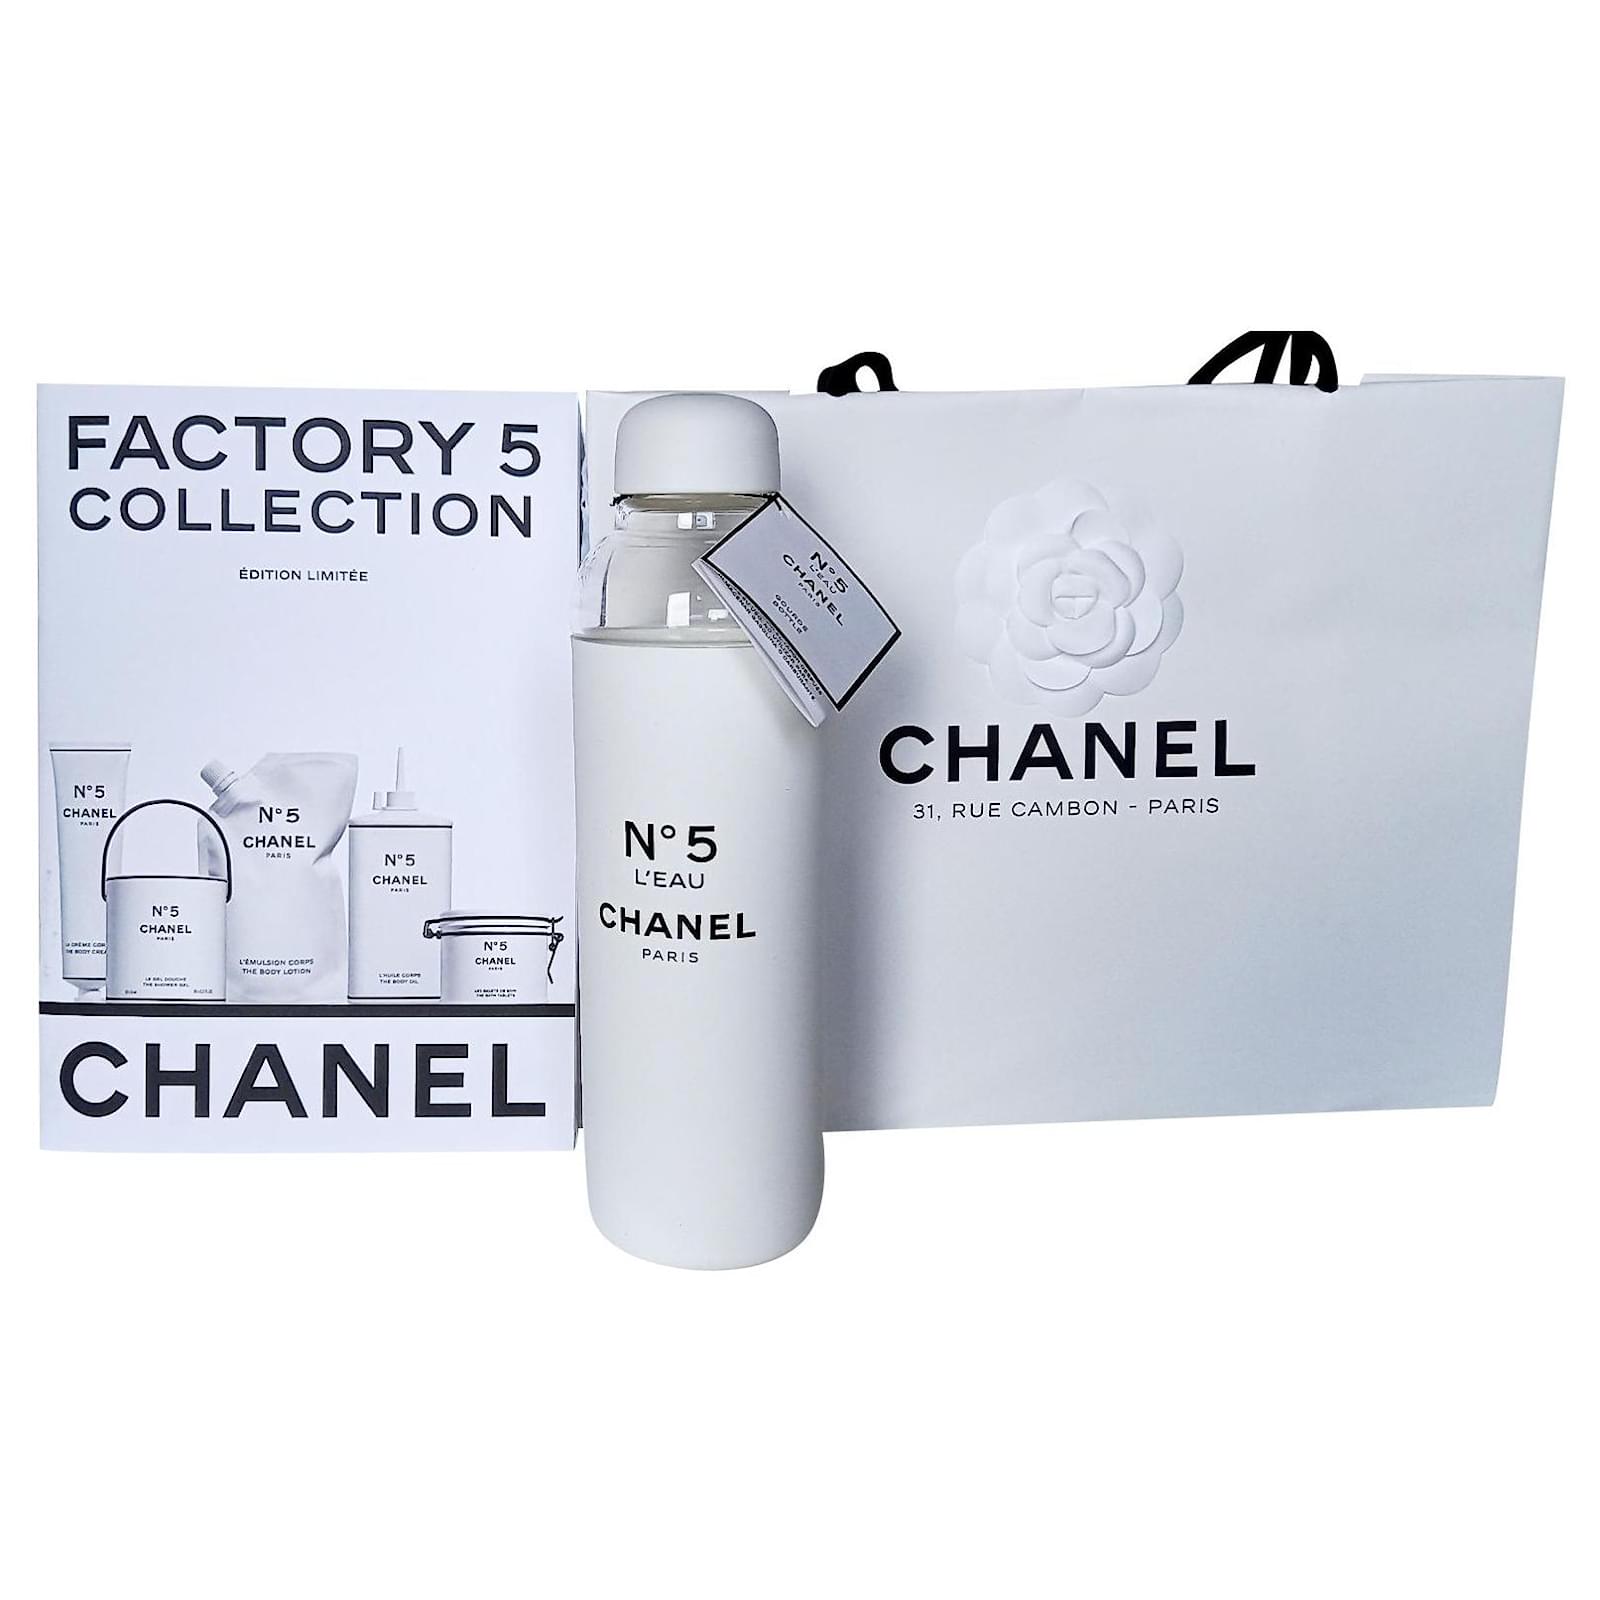 Chanel celebrate 100th anniversary of No. 5 with Chanel Factory 5 Collection  • Basenotes